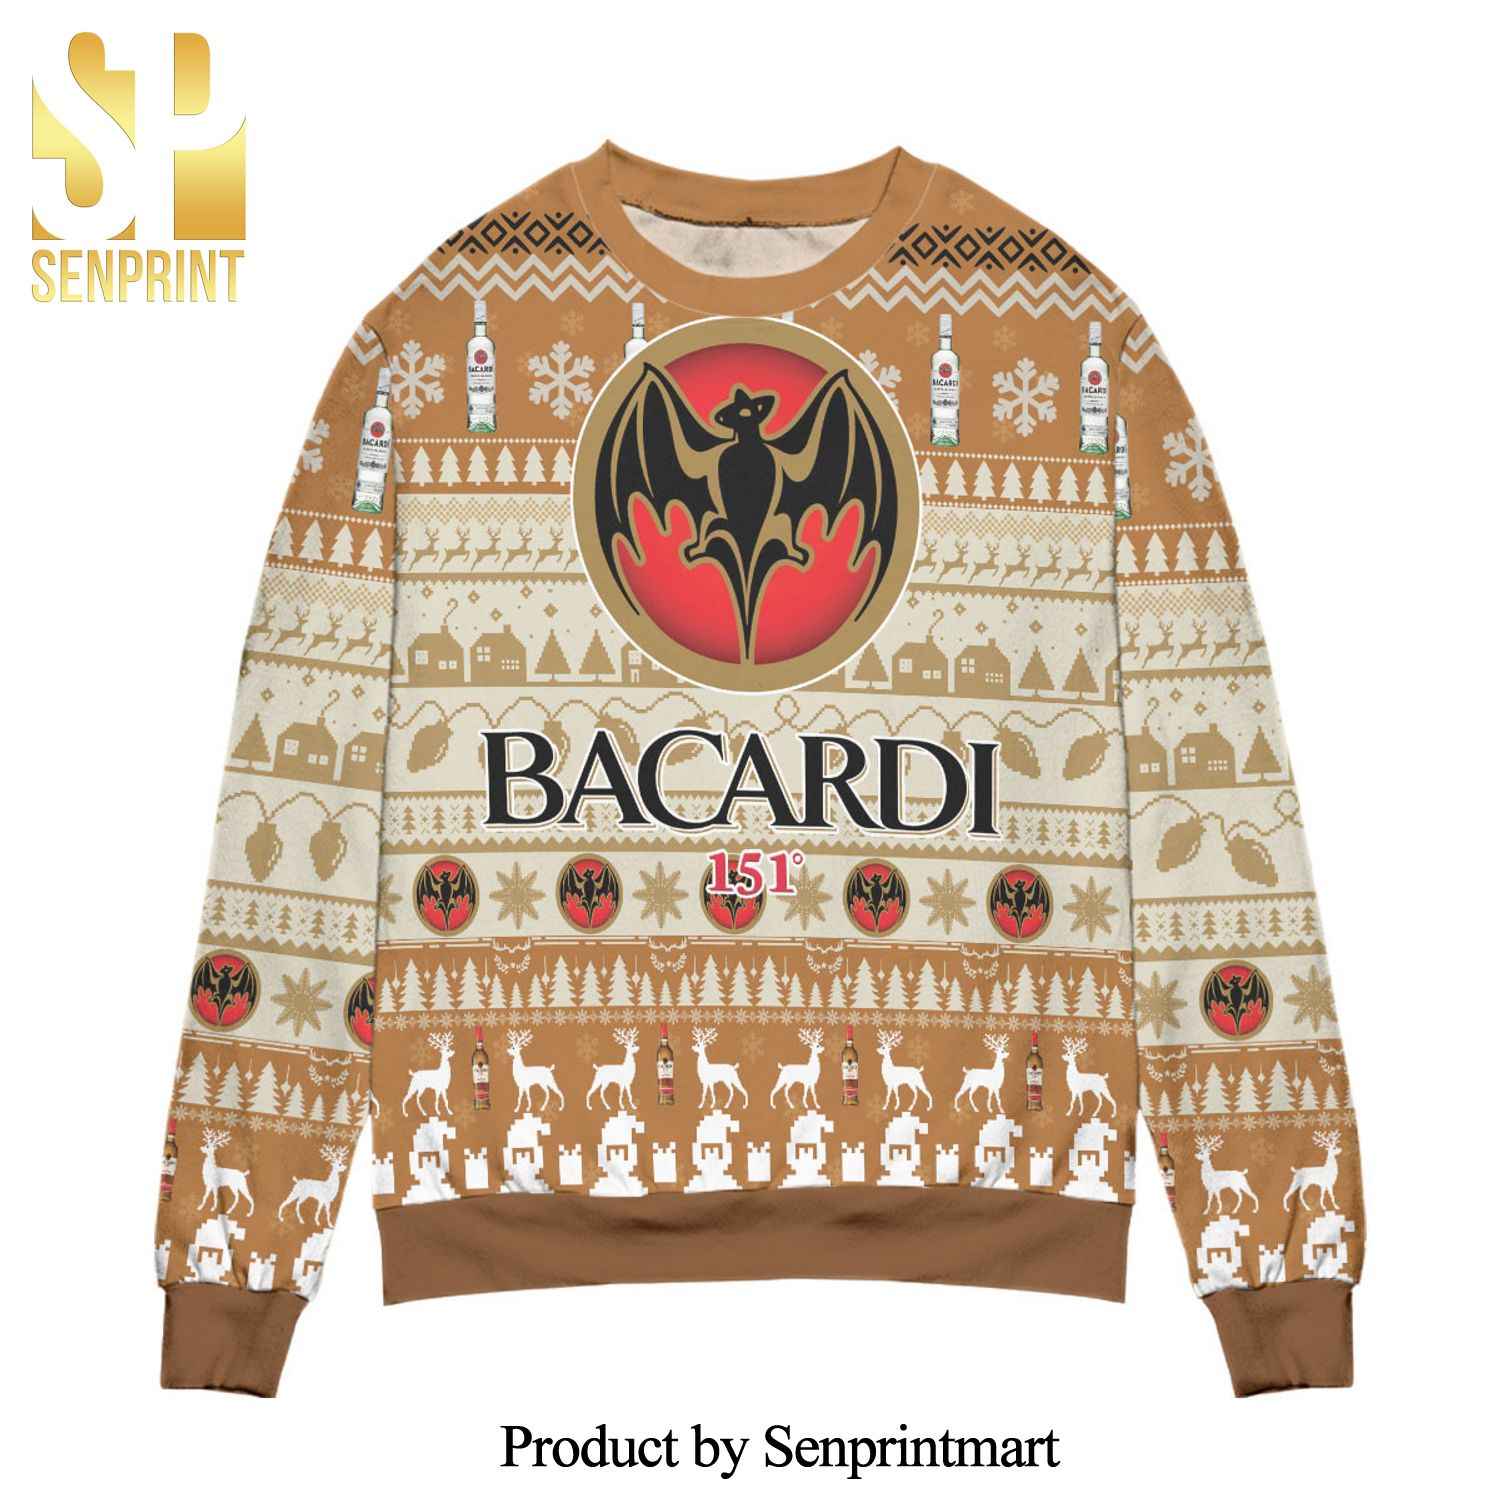 Bacardi 151 Reindeer Pattern Knitted Ugly Christmas Sweater